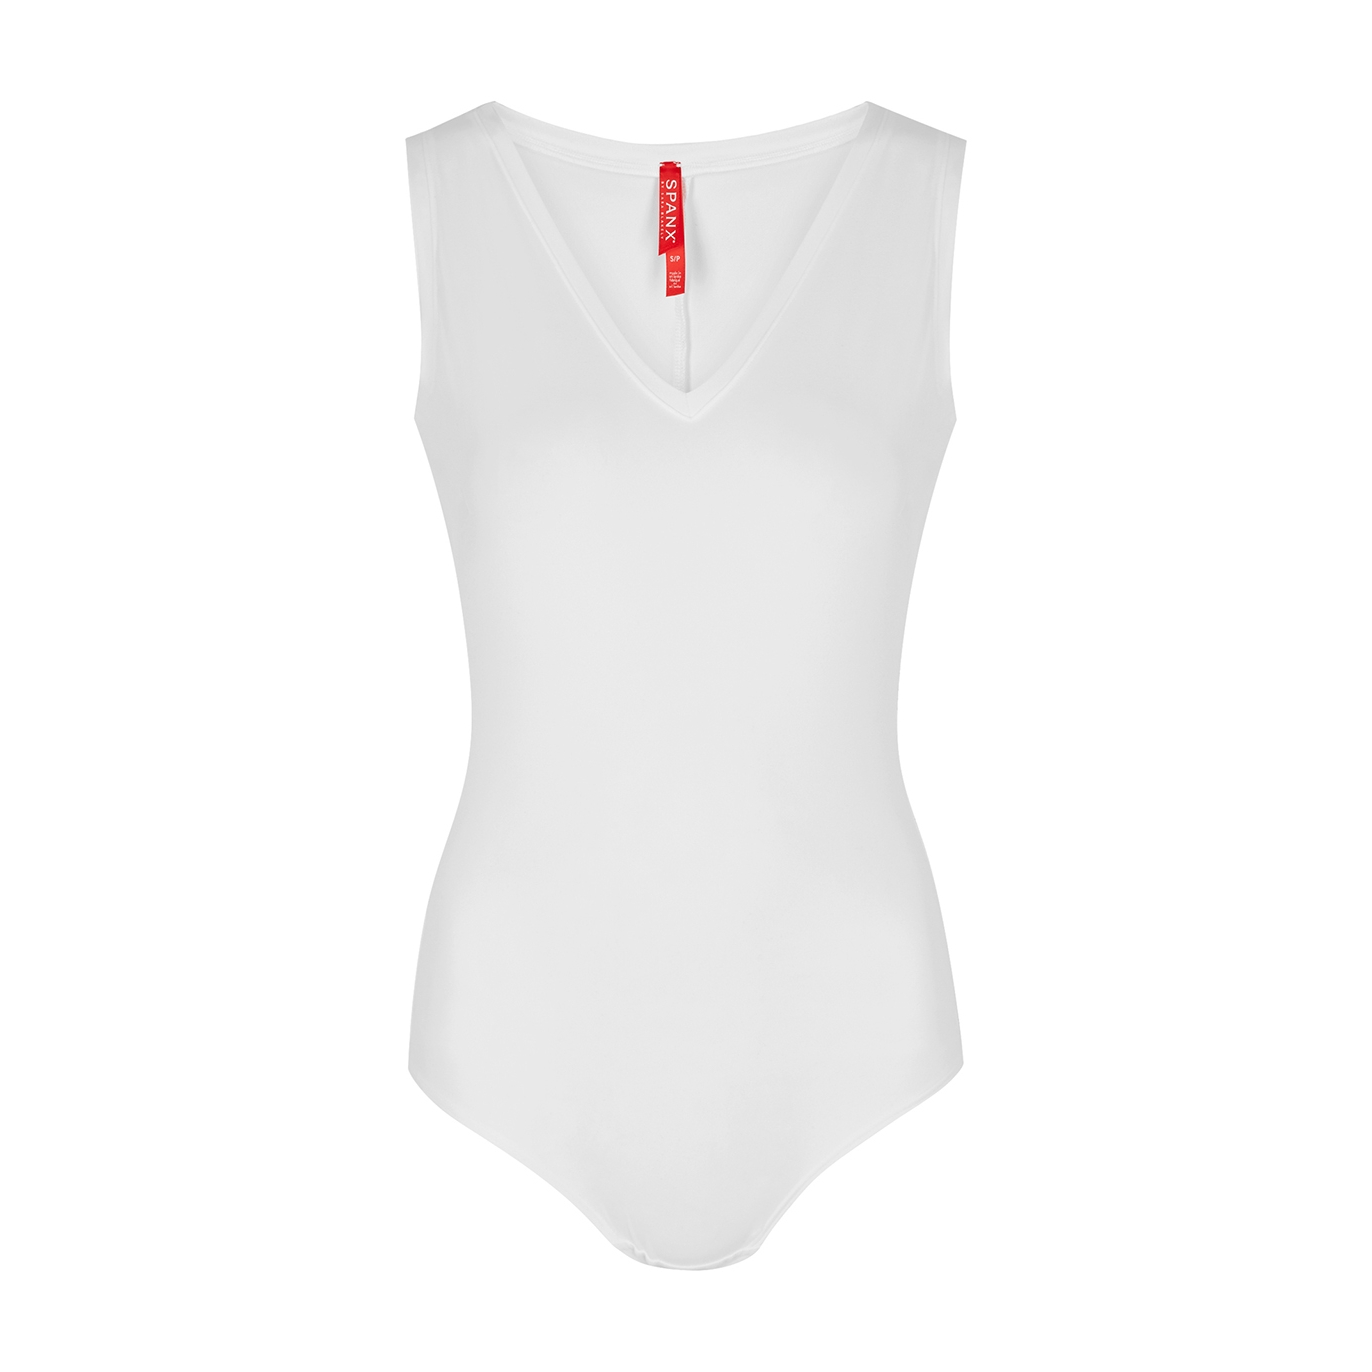 Spanx Suit Yourself White Stretch-jersey Bodysuit - L